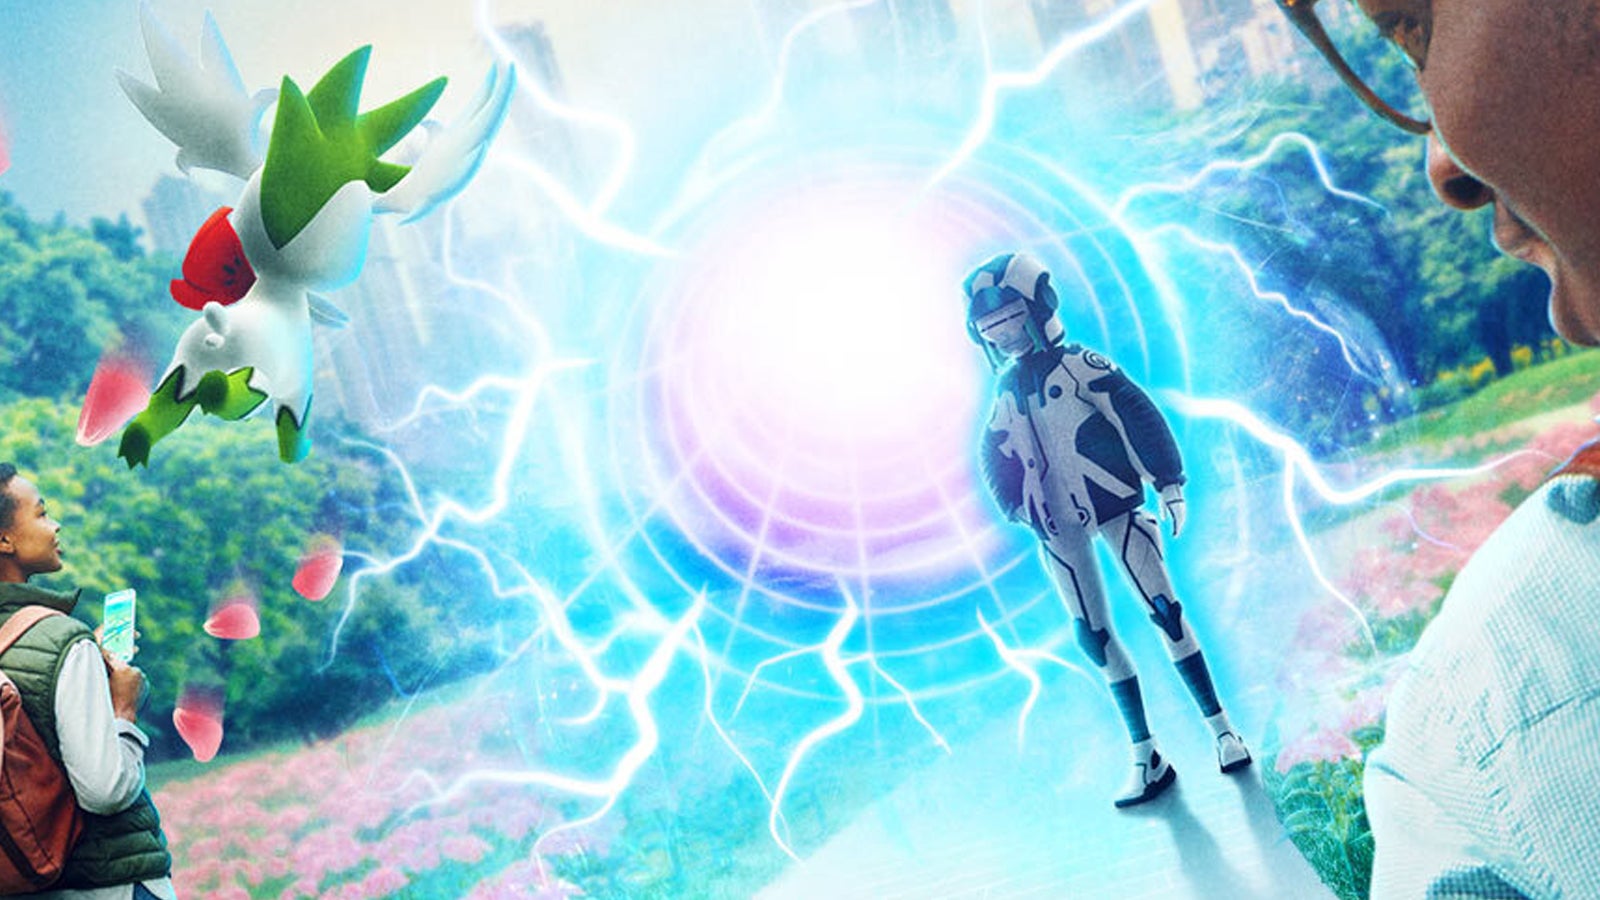 Image for Pokémon Go details new season, unveils first new character in two years